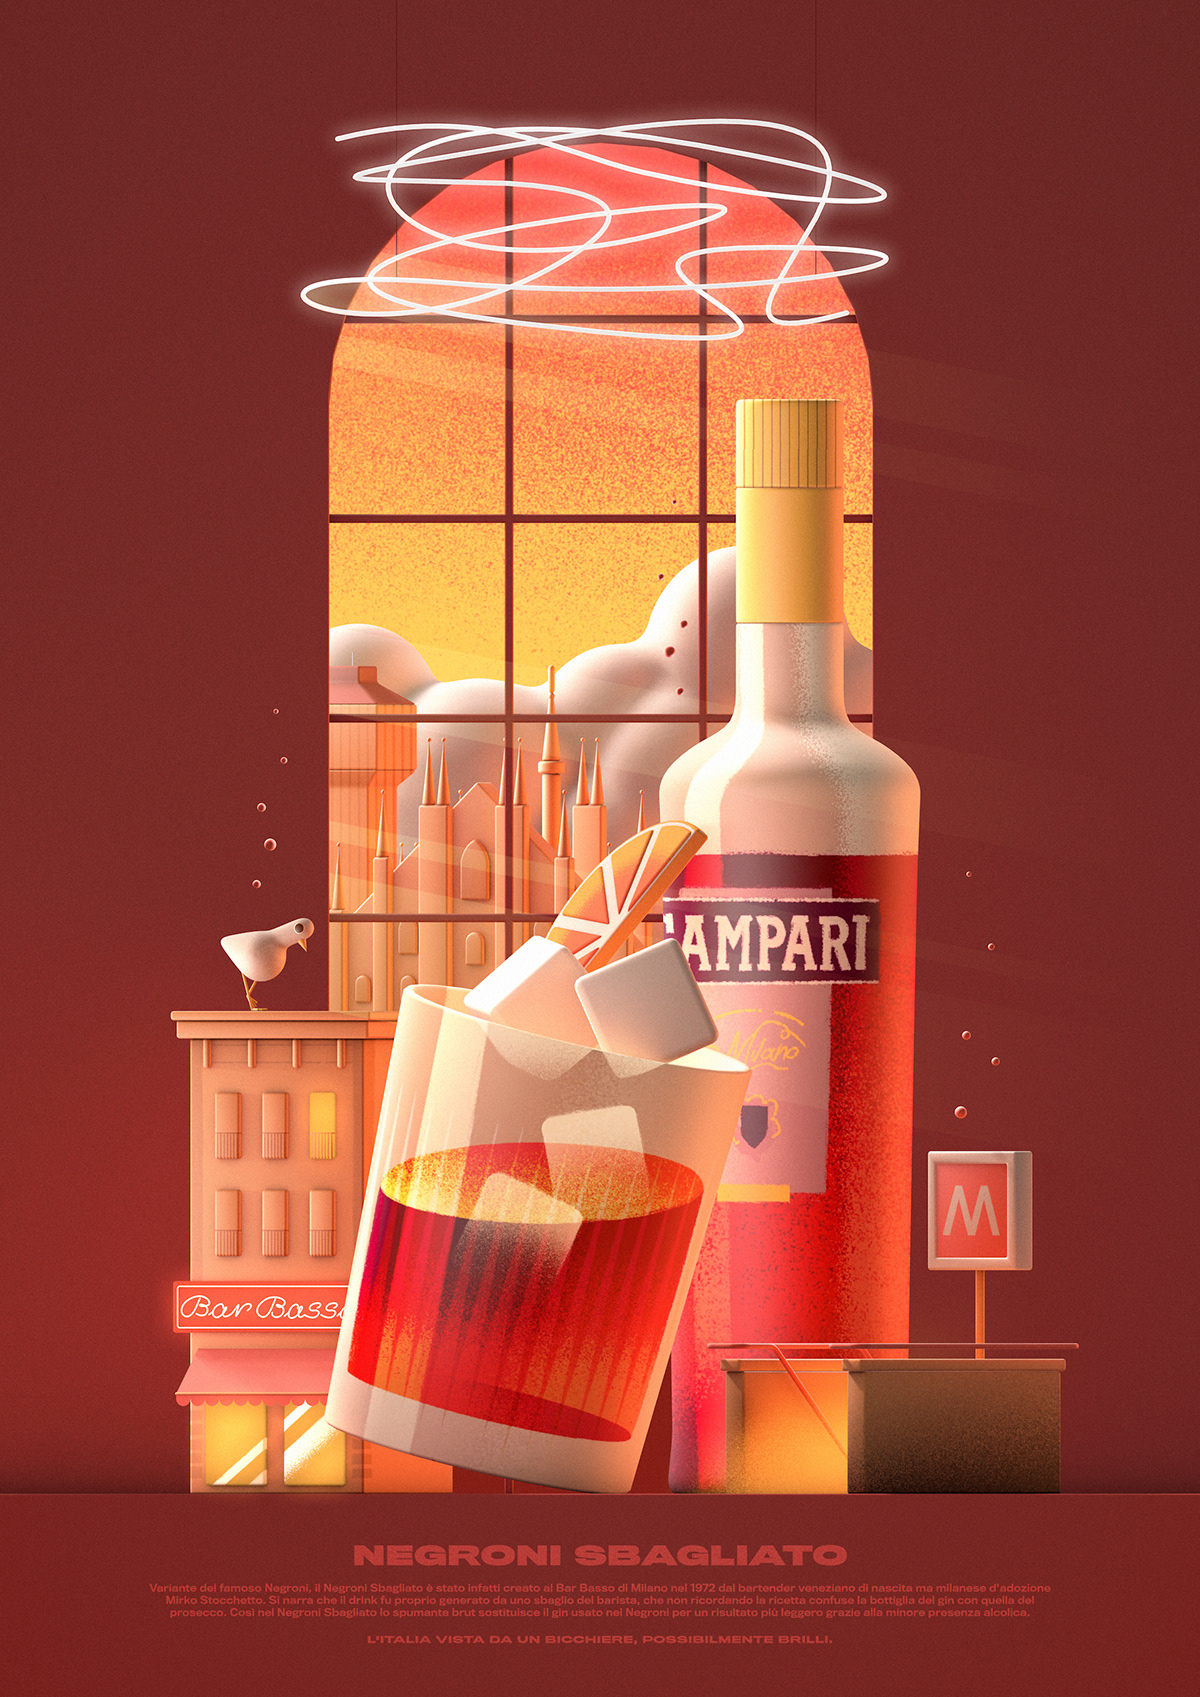 3D Illustrated poster about Negroni Sbagliato Cocktail.